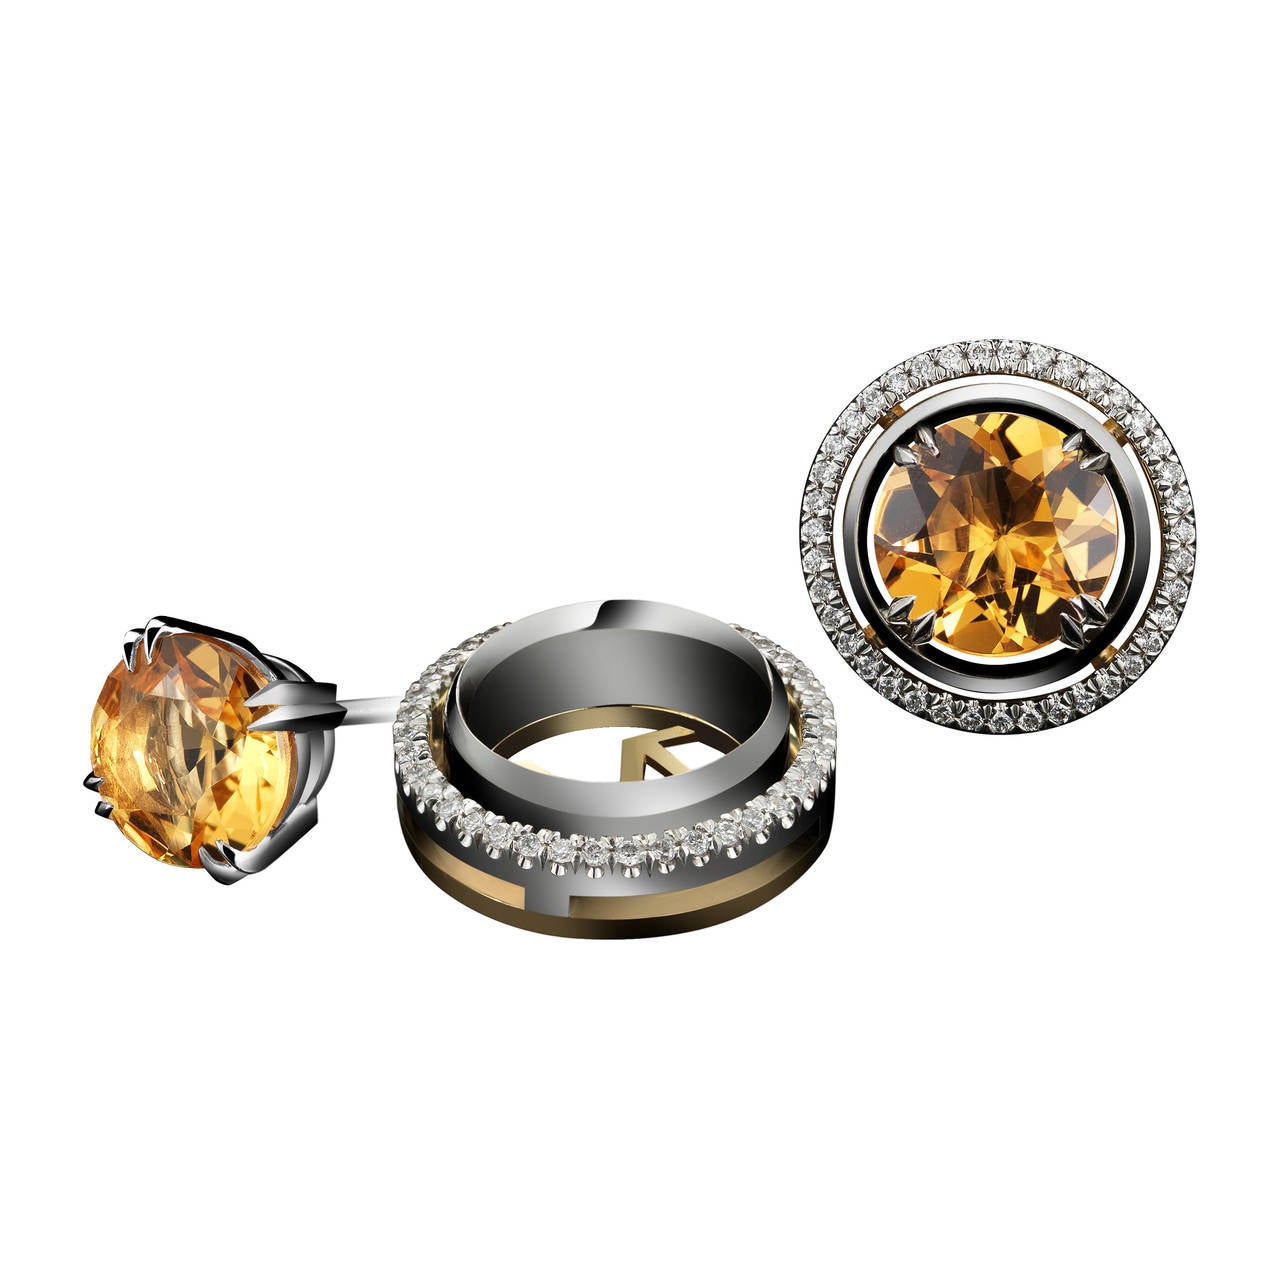 *Please contact us for more information on this piece or on creating your own Alexandra Mor custom Design.

A pair of Alexandra Mor studs with Round Yellow Citrine at 3.40 total carat weight accompanied by Diamond earring jackets detailed with